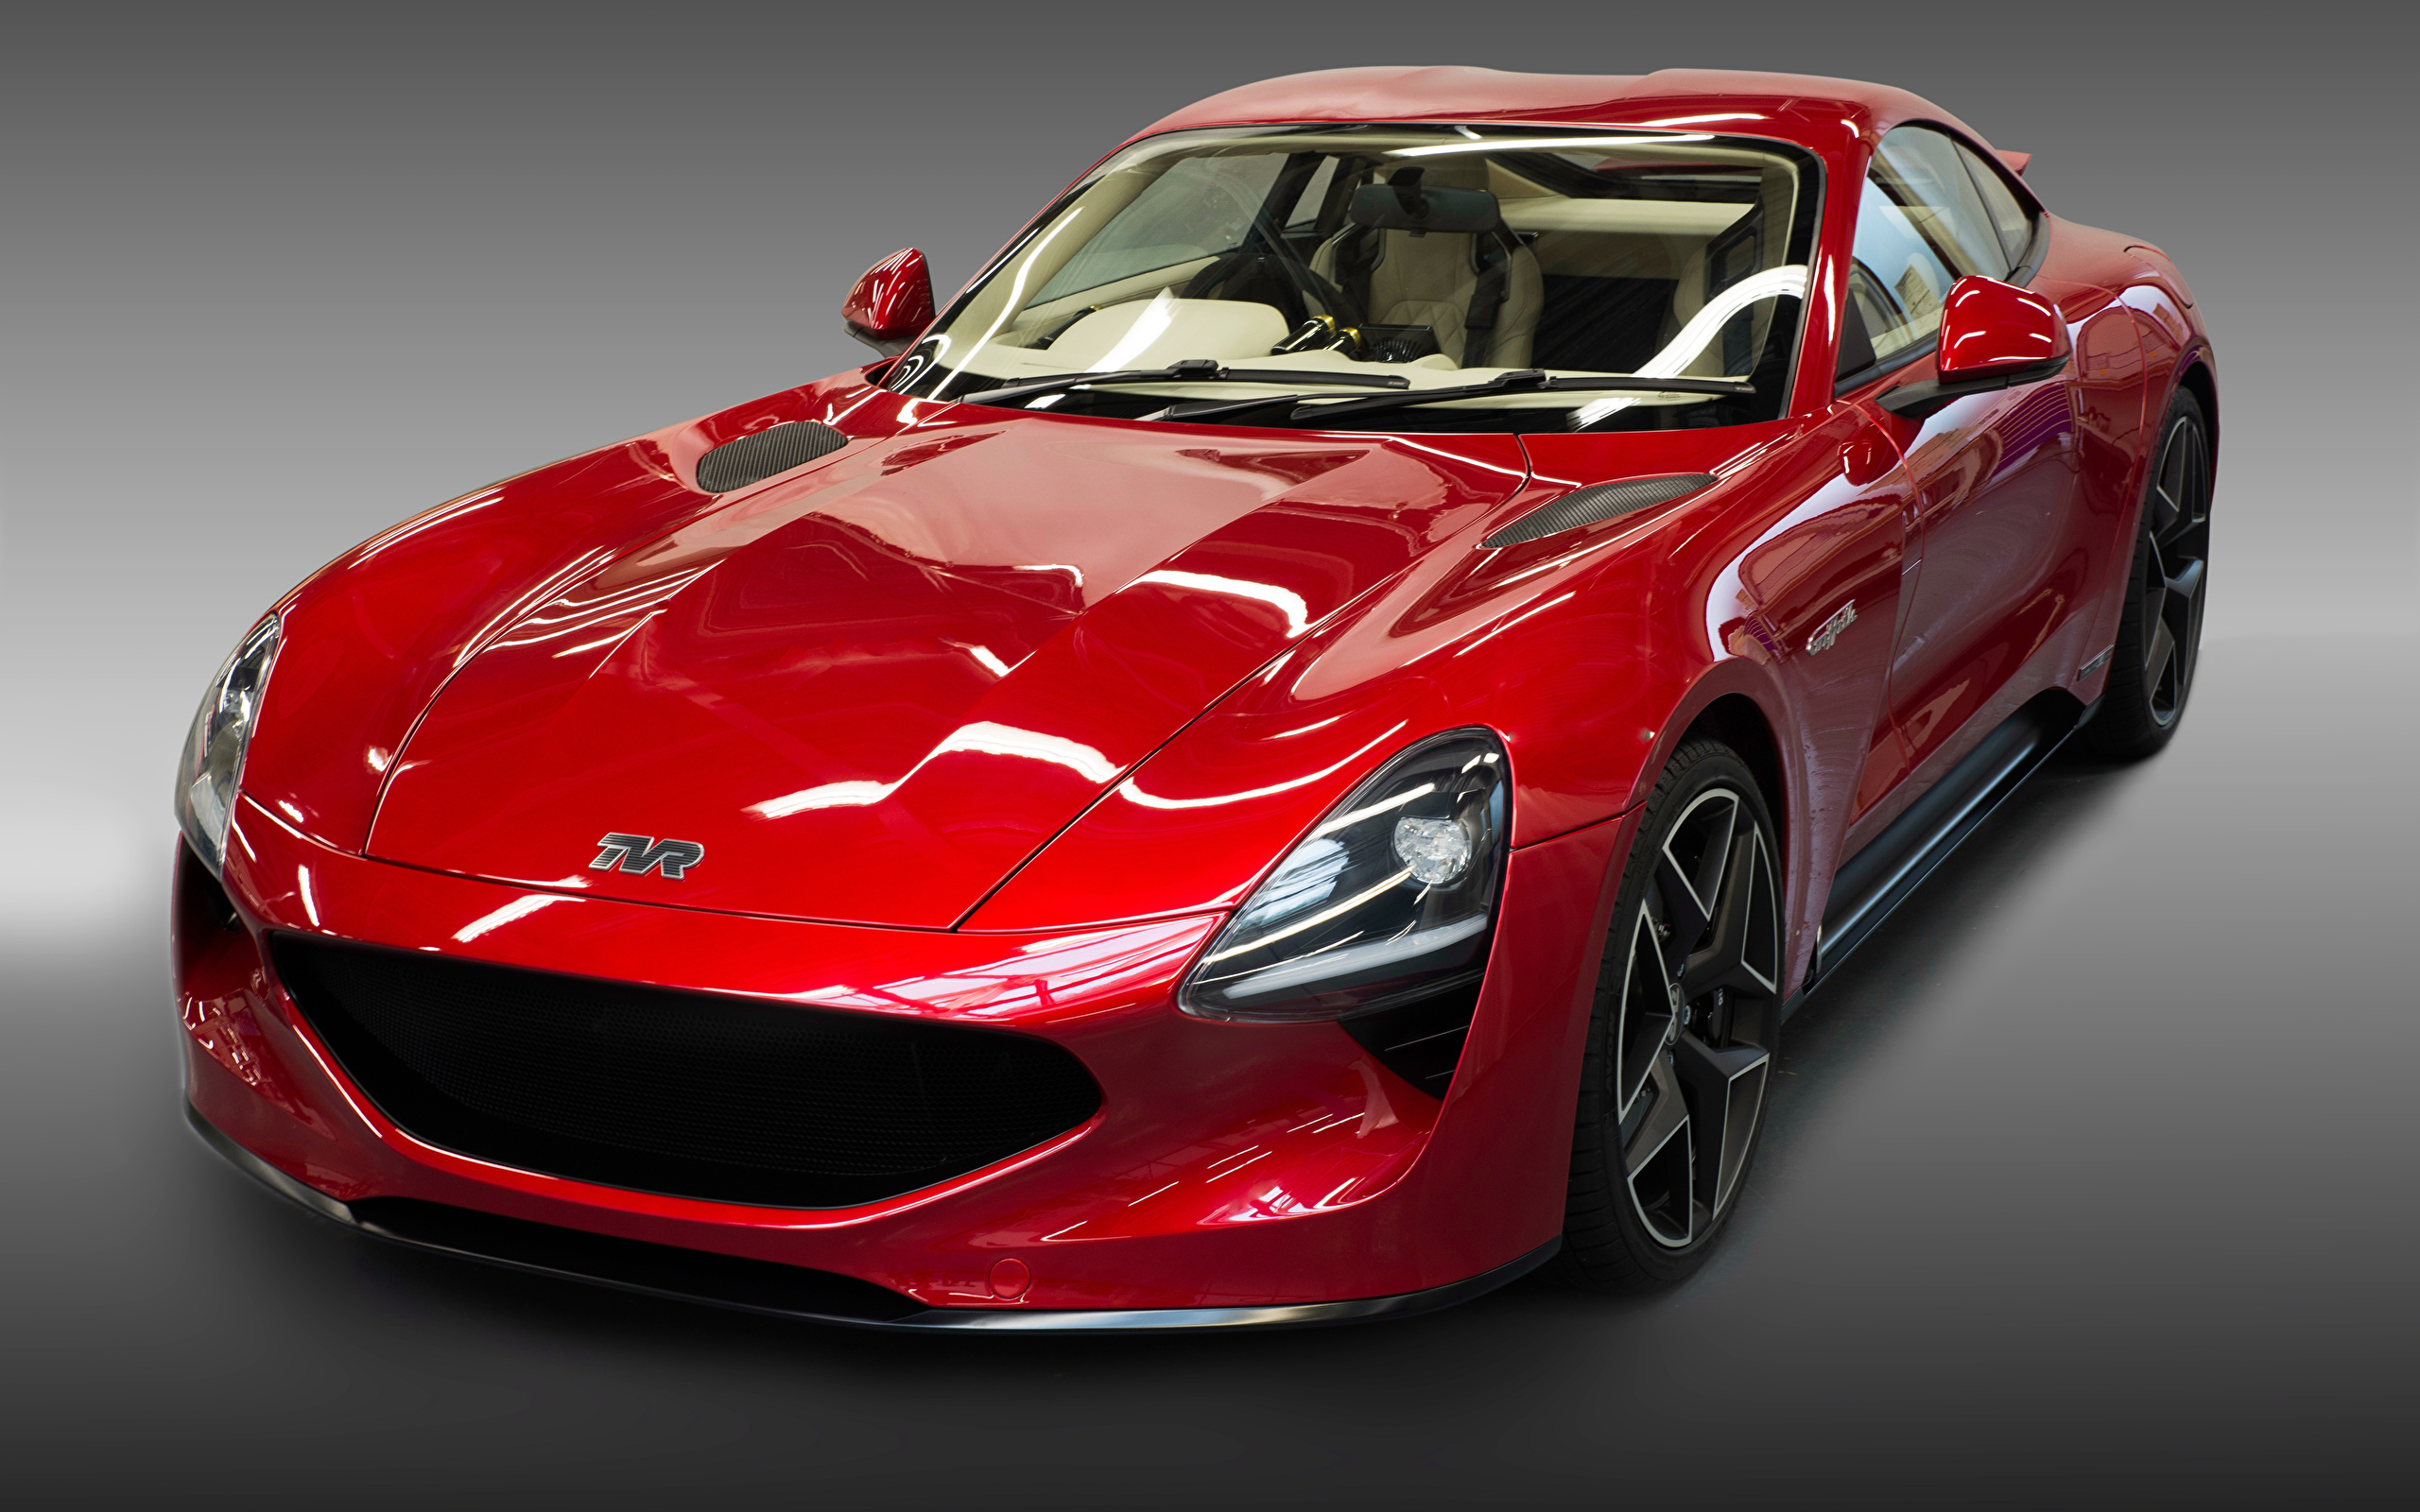 Pictures Tvr Griffith Red Cars Metallic